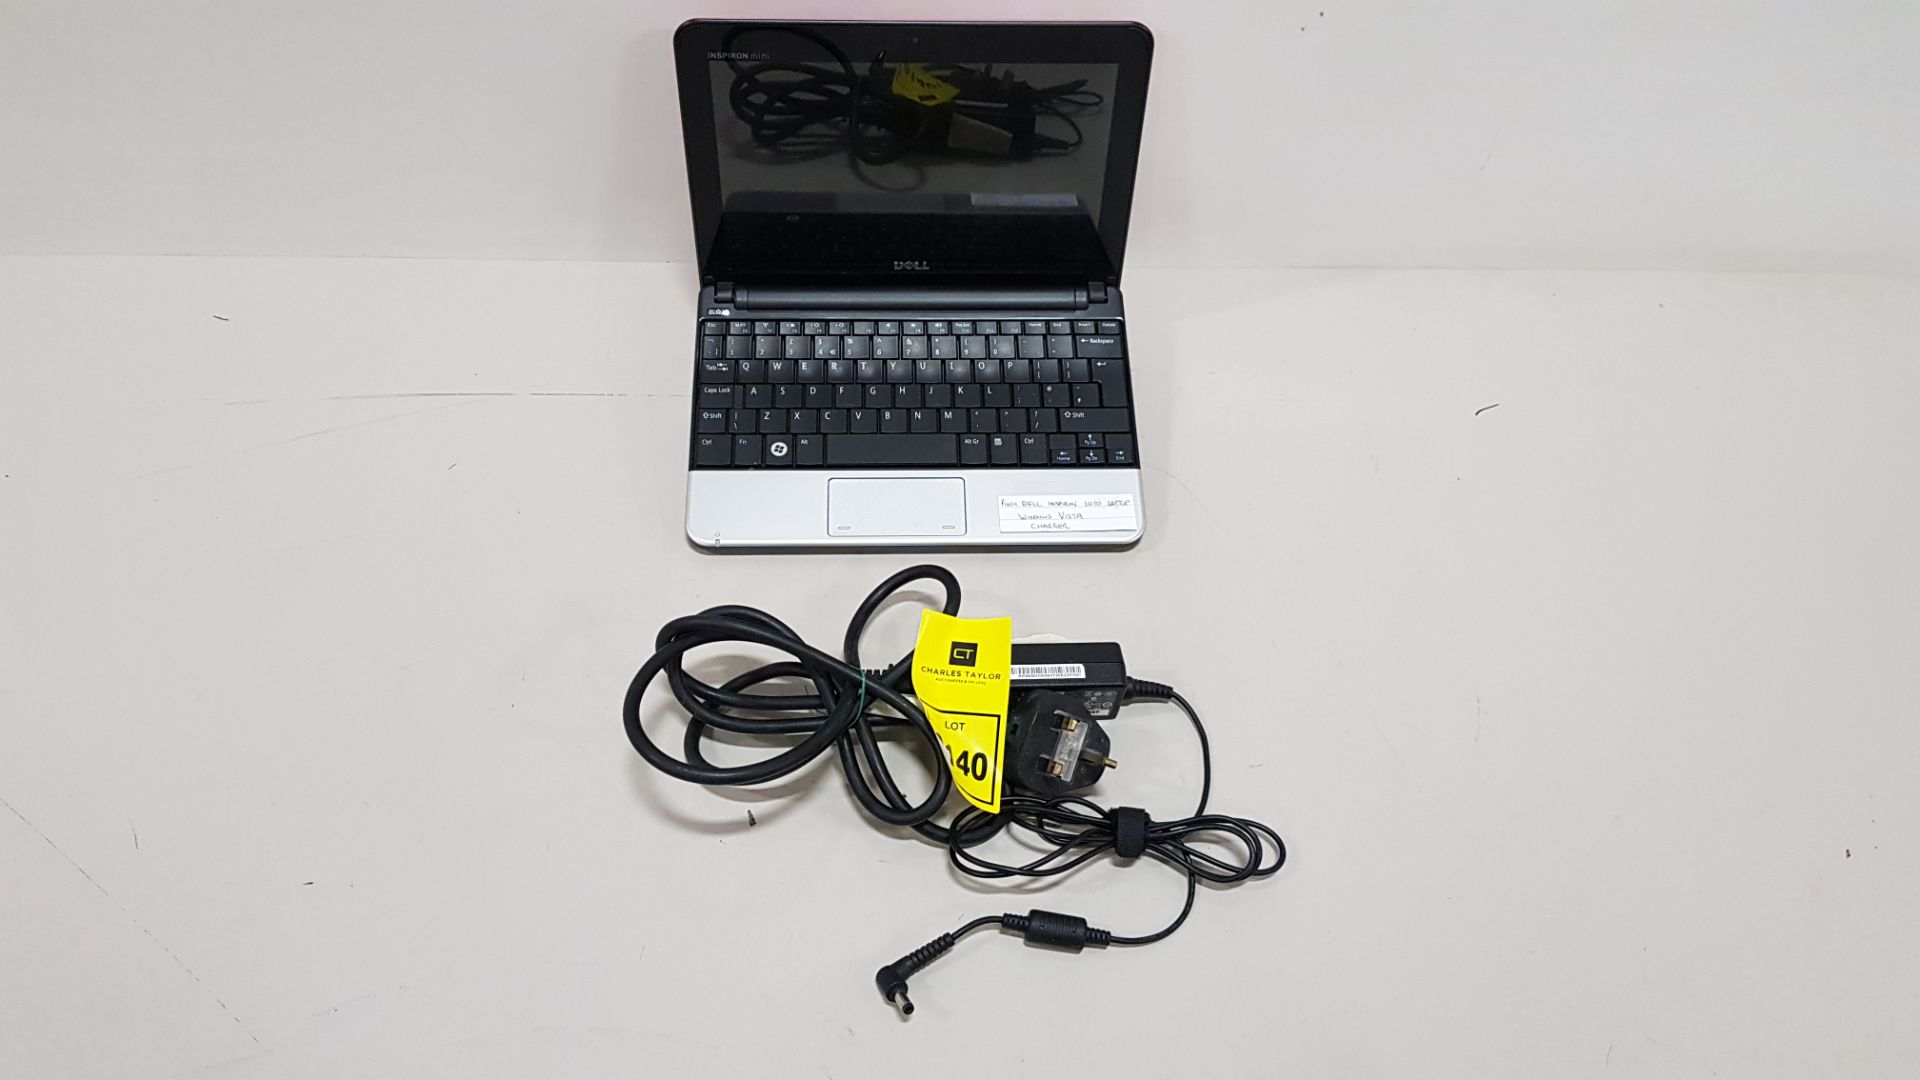 PINIC DELL INSPIRON 1010 LAPTOP WINDOWS VISTA - WITH CHARGER